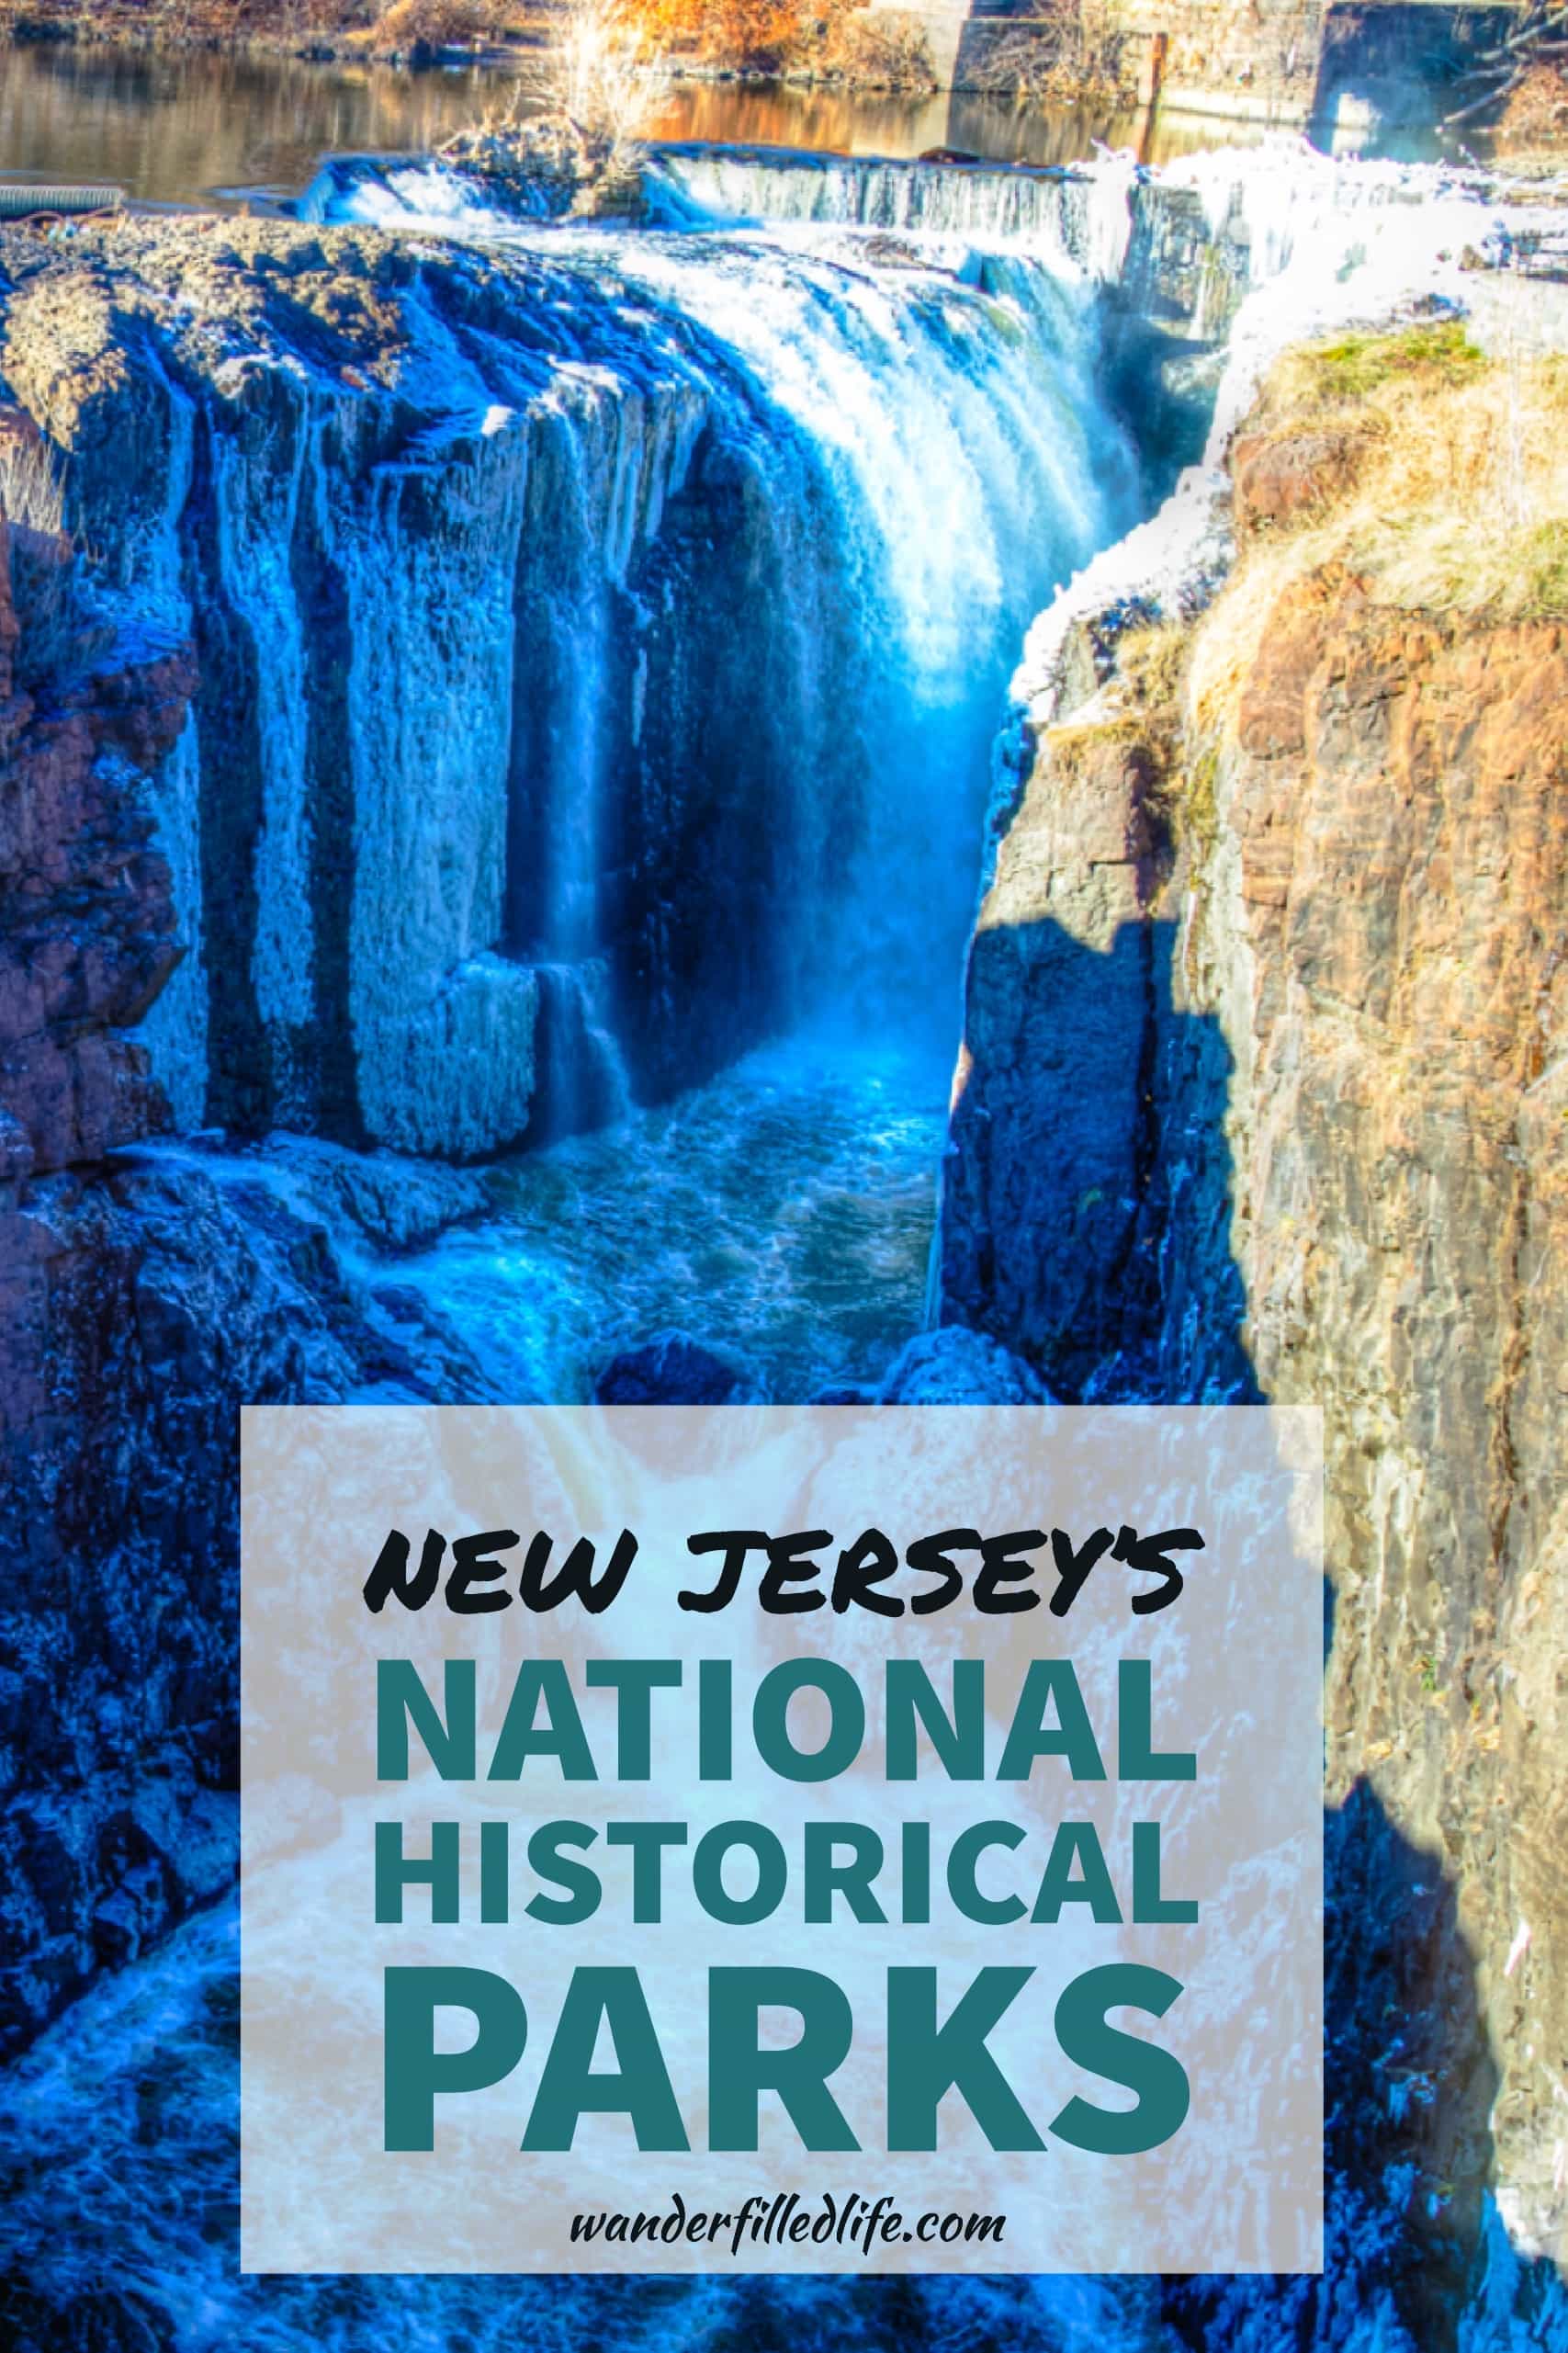 An inside look at the New Jersey National Historical Parks: Morristown NHP, Paterson Great Falls NHP and Thomas Edison NHP.